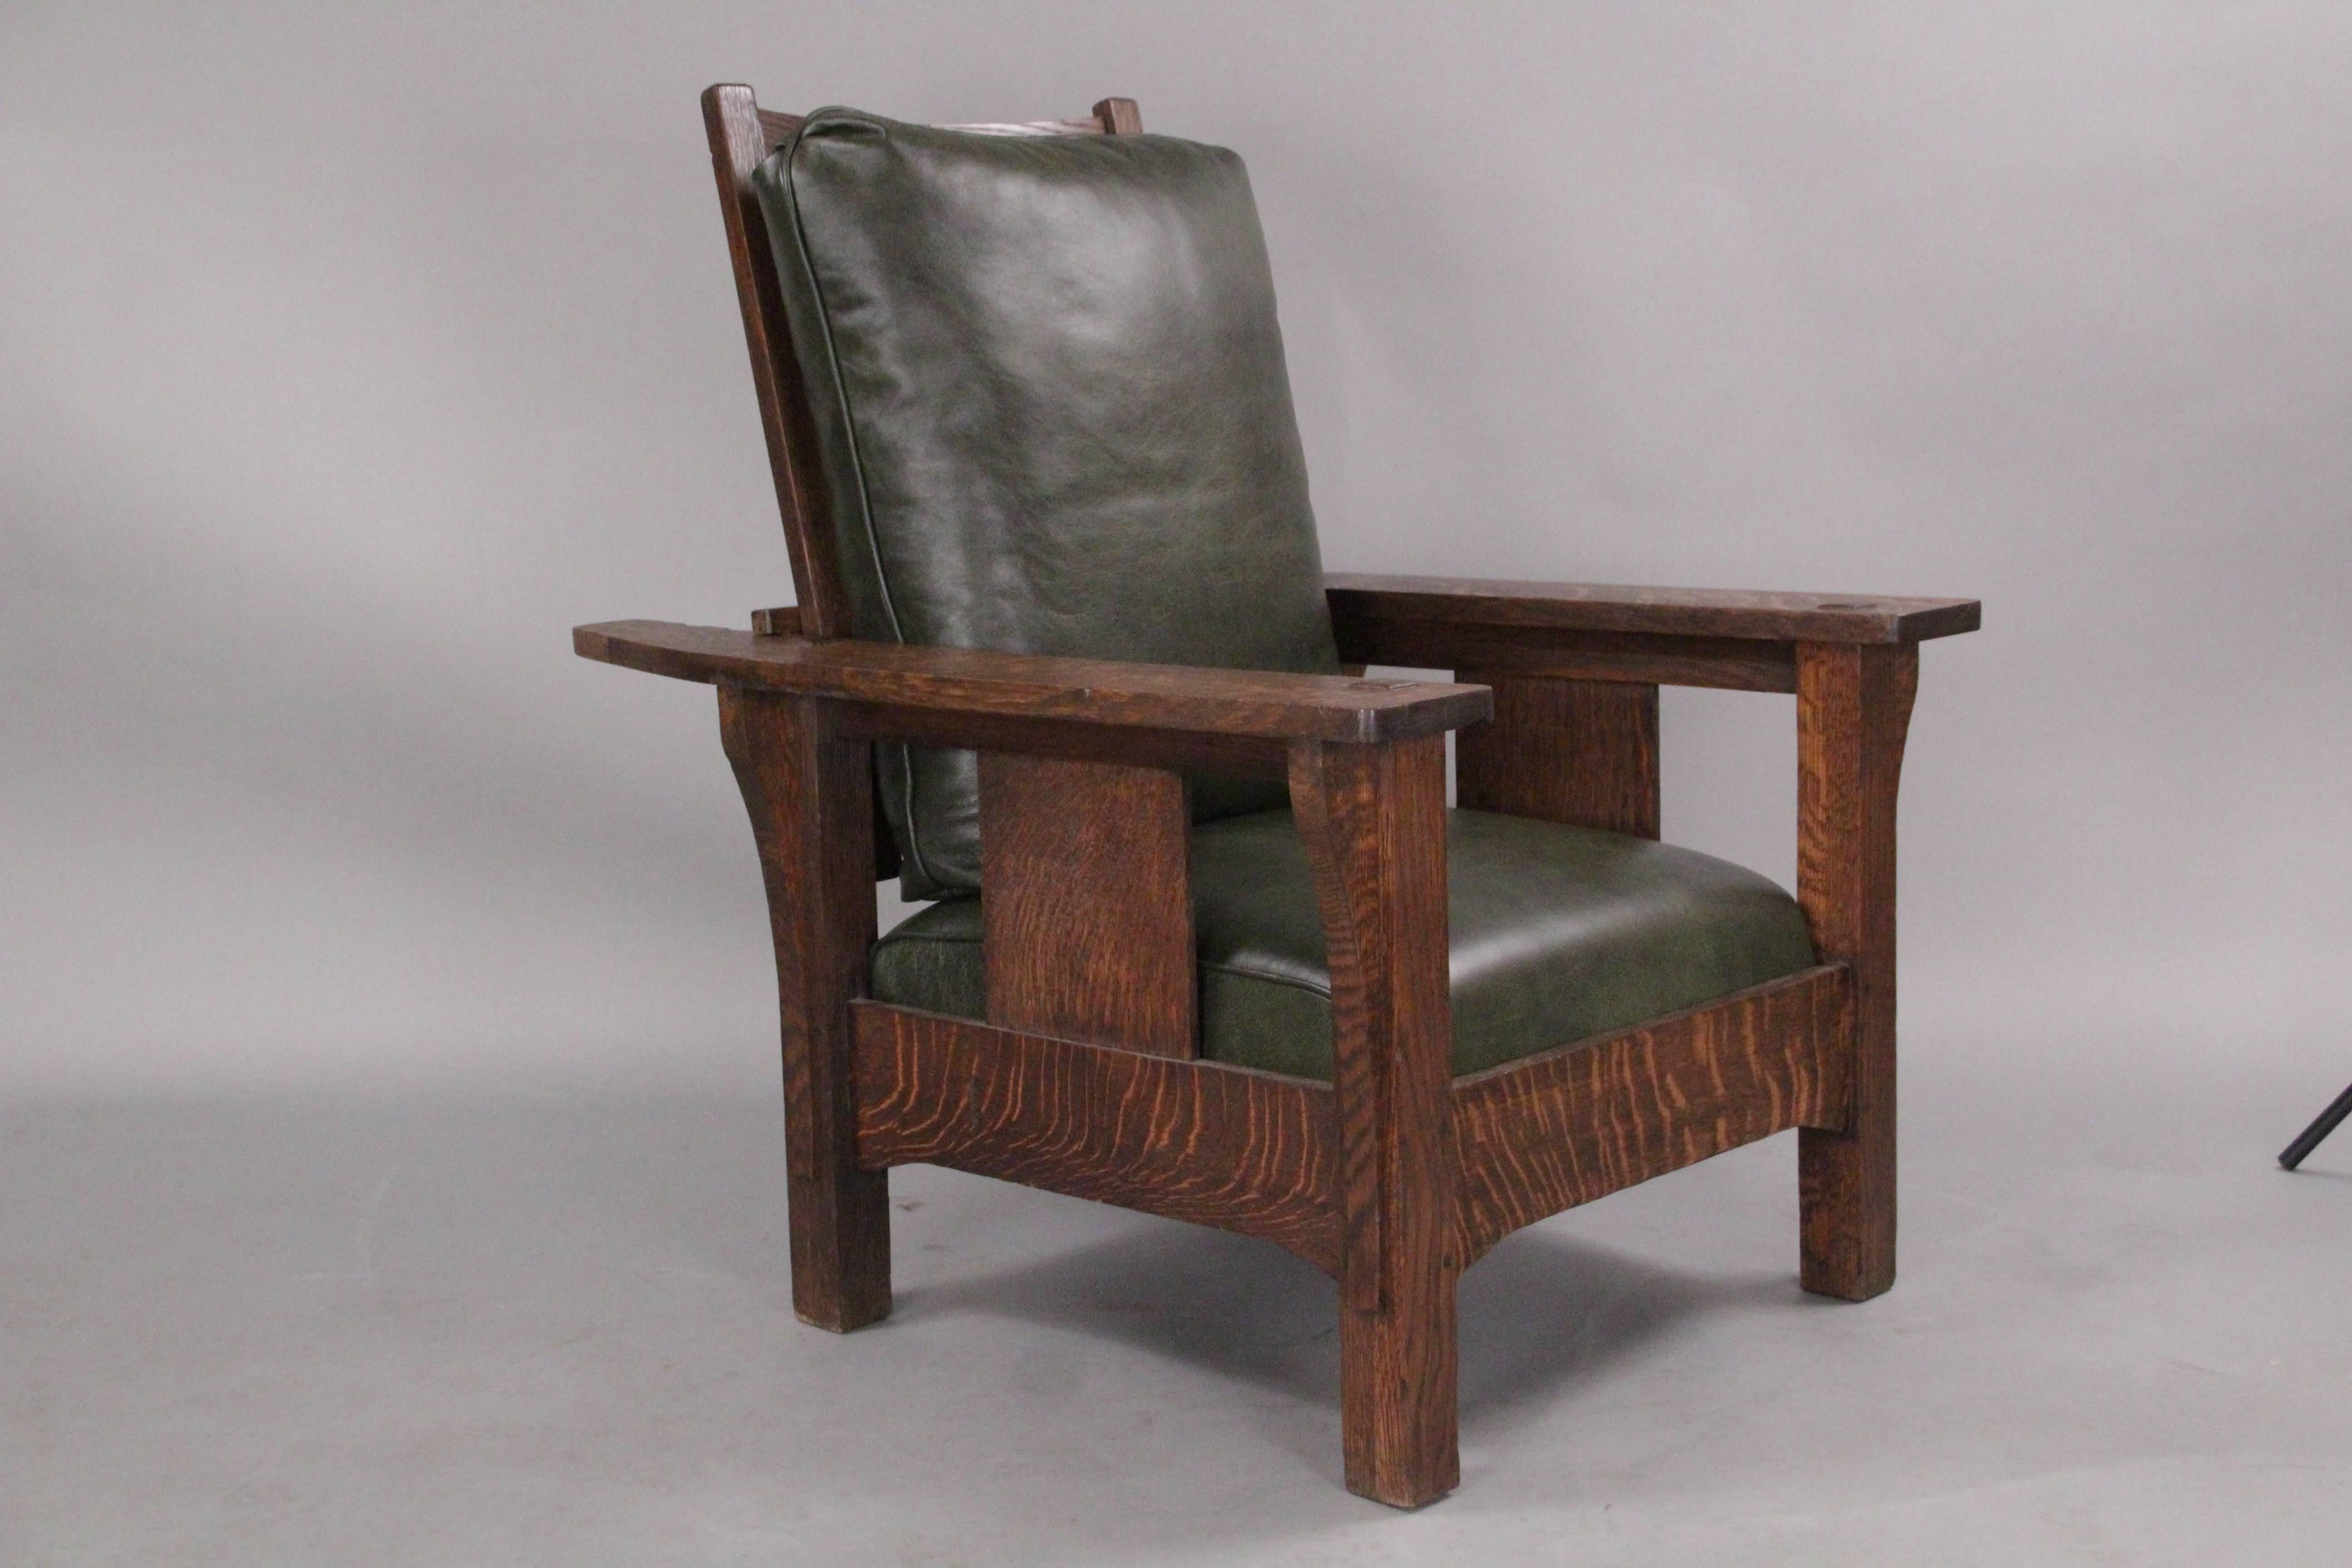 Nice large-scale Arts and Crafts Morris chair with new leather upholstery. Pinned with tenon construction. Quartersawn oak, circa 1910